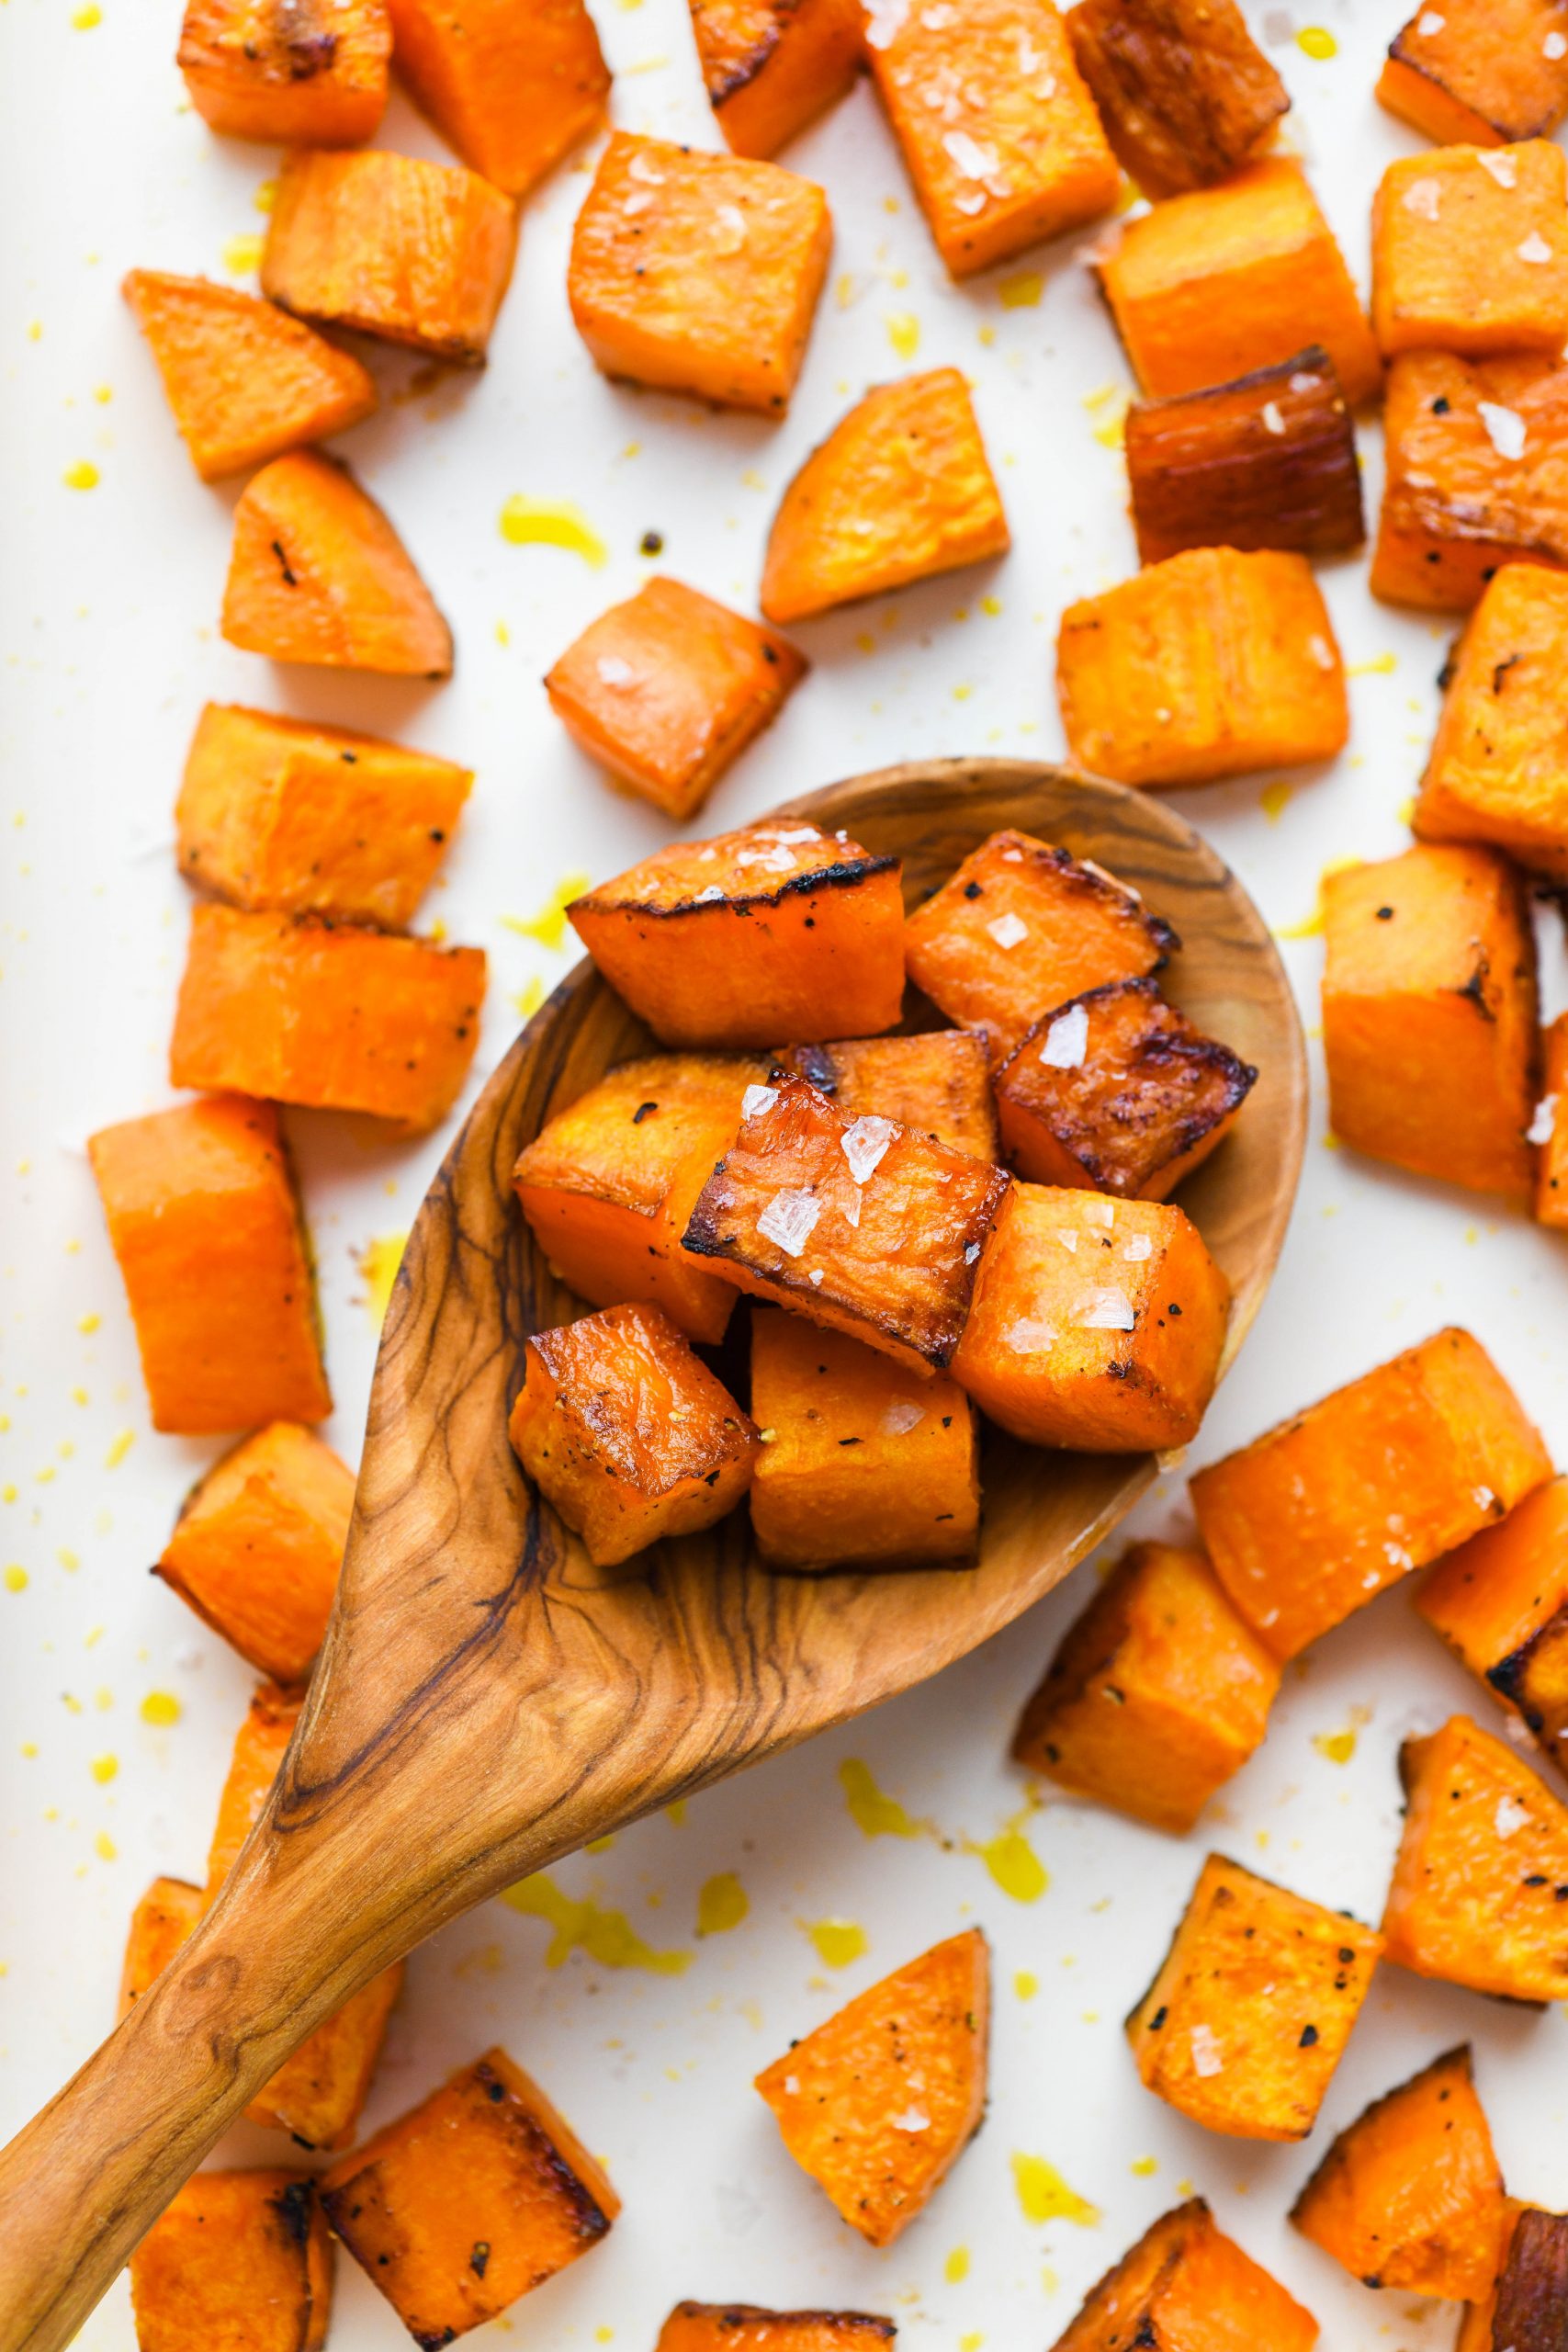 https://nyssaskitchen.com/wp-content/uploads/2021/09/Healthy-Roasted-Sweet-Potatoes-31-scaled.jpg